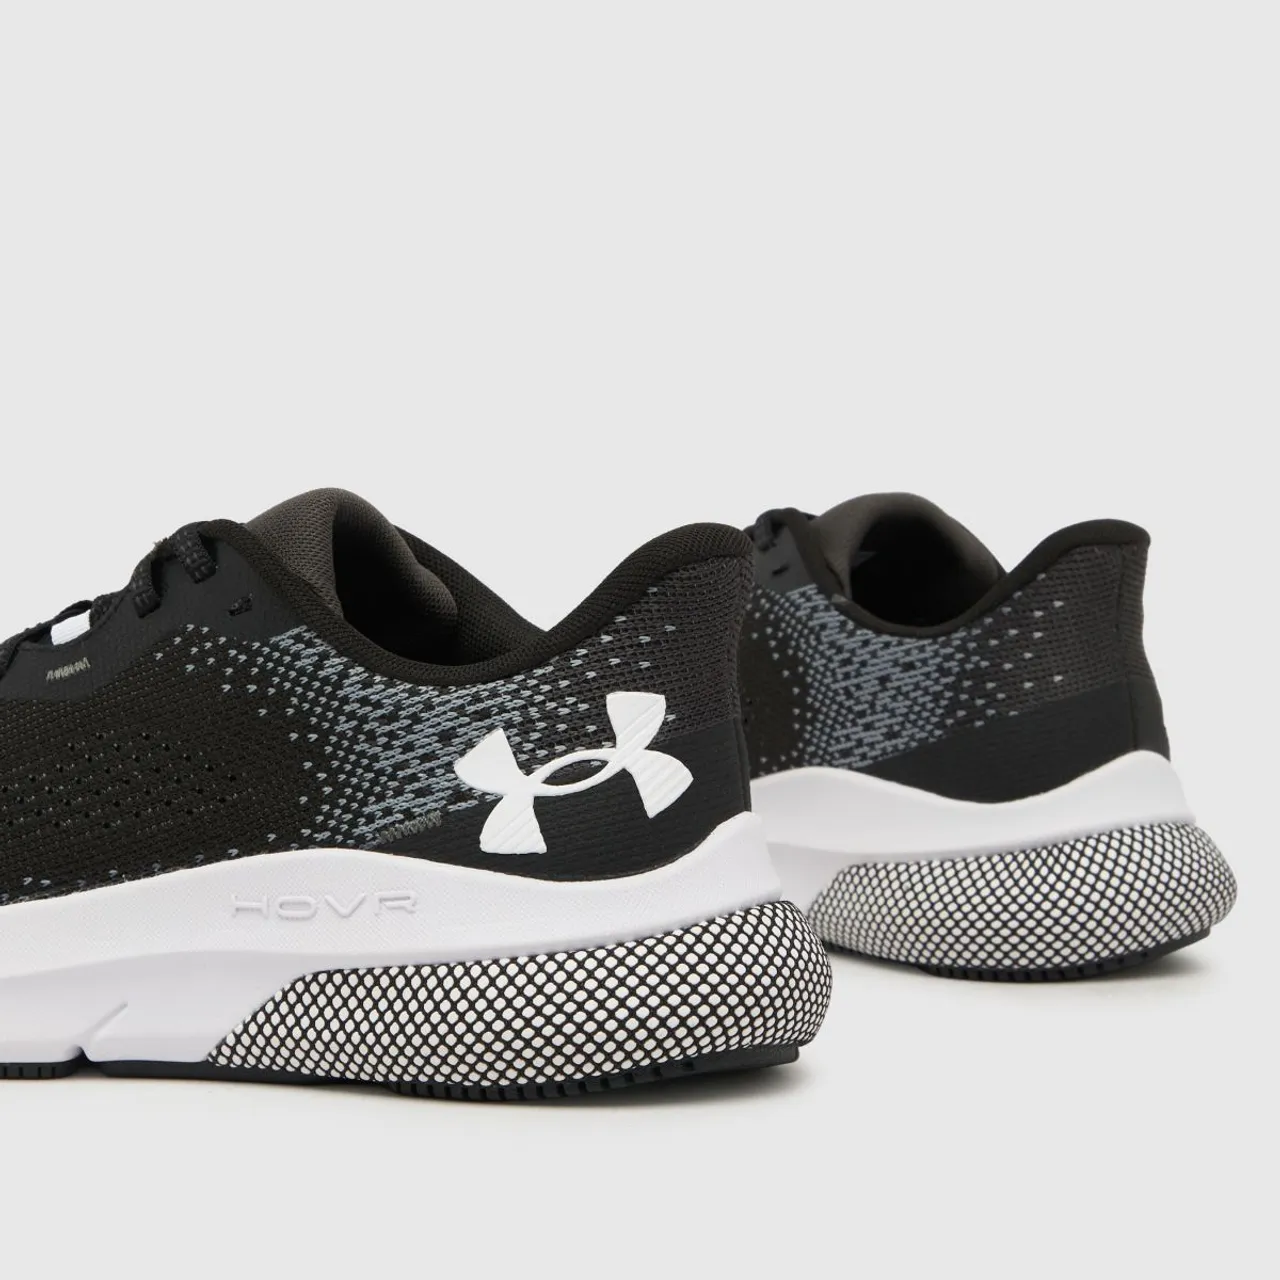 Under Armour Ua Hovr Turbulence 2 Trainers In Black & White